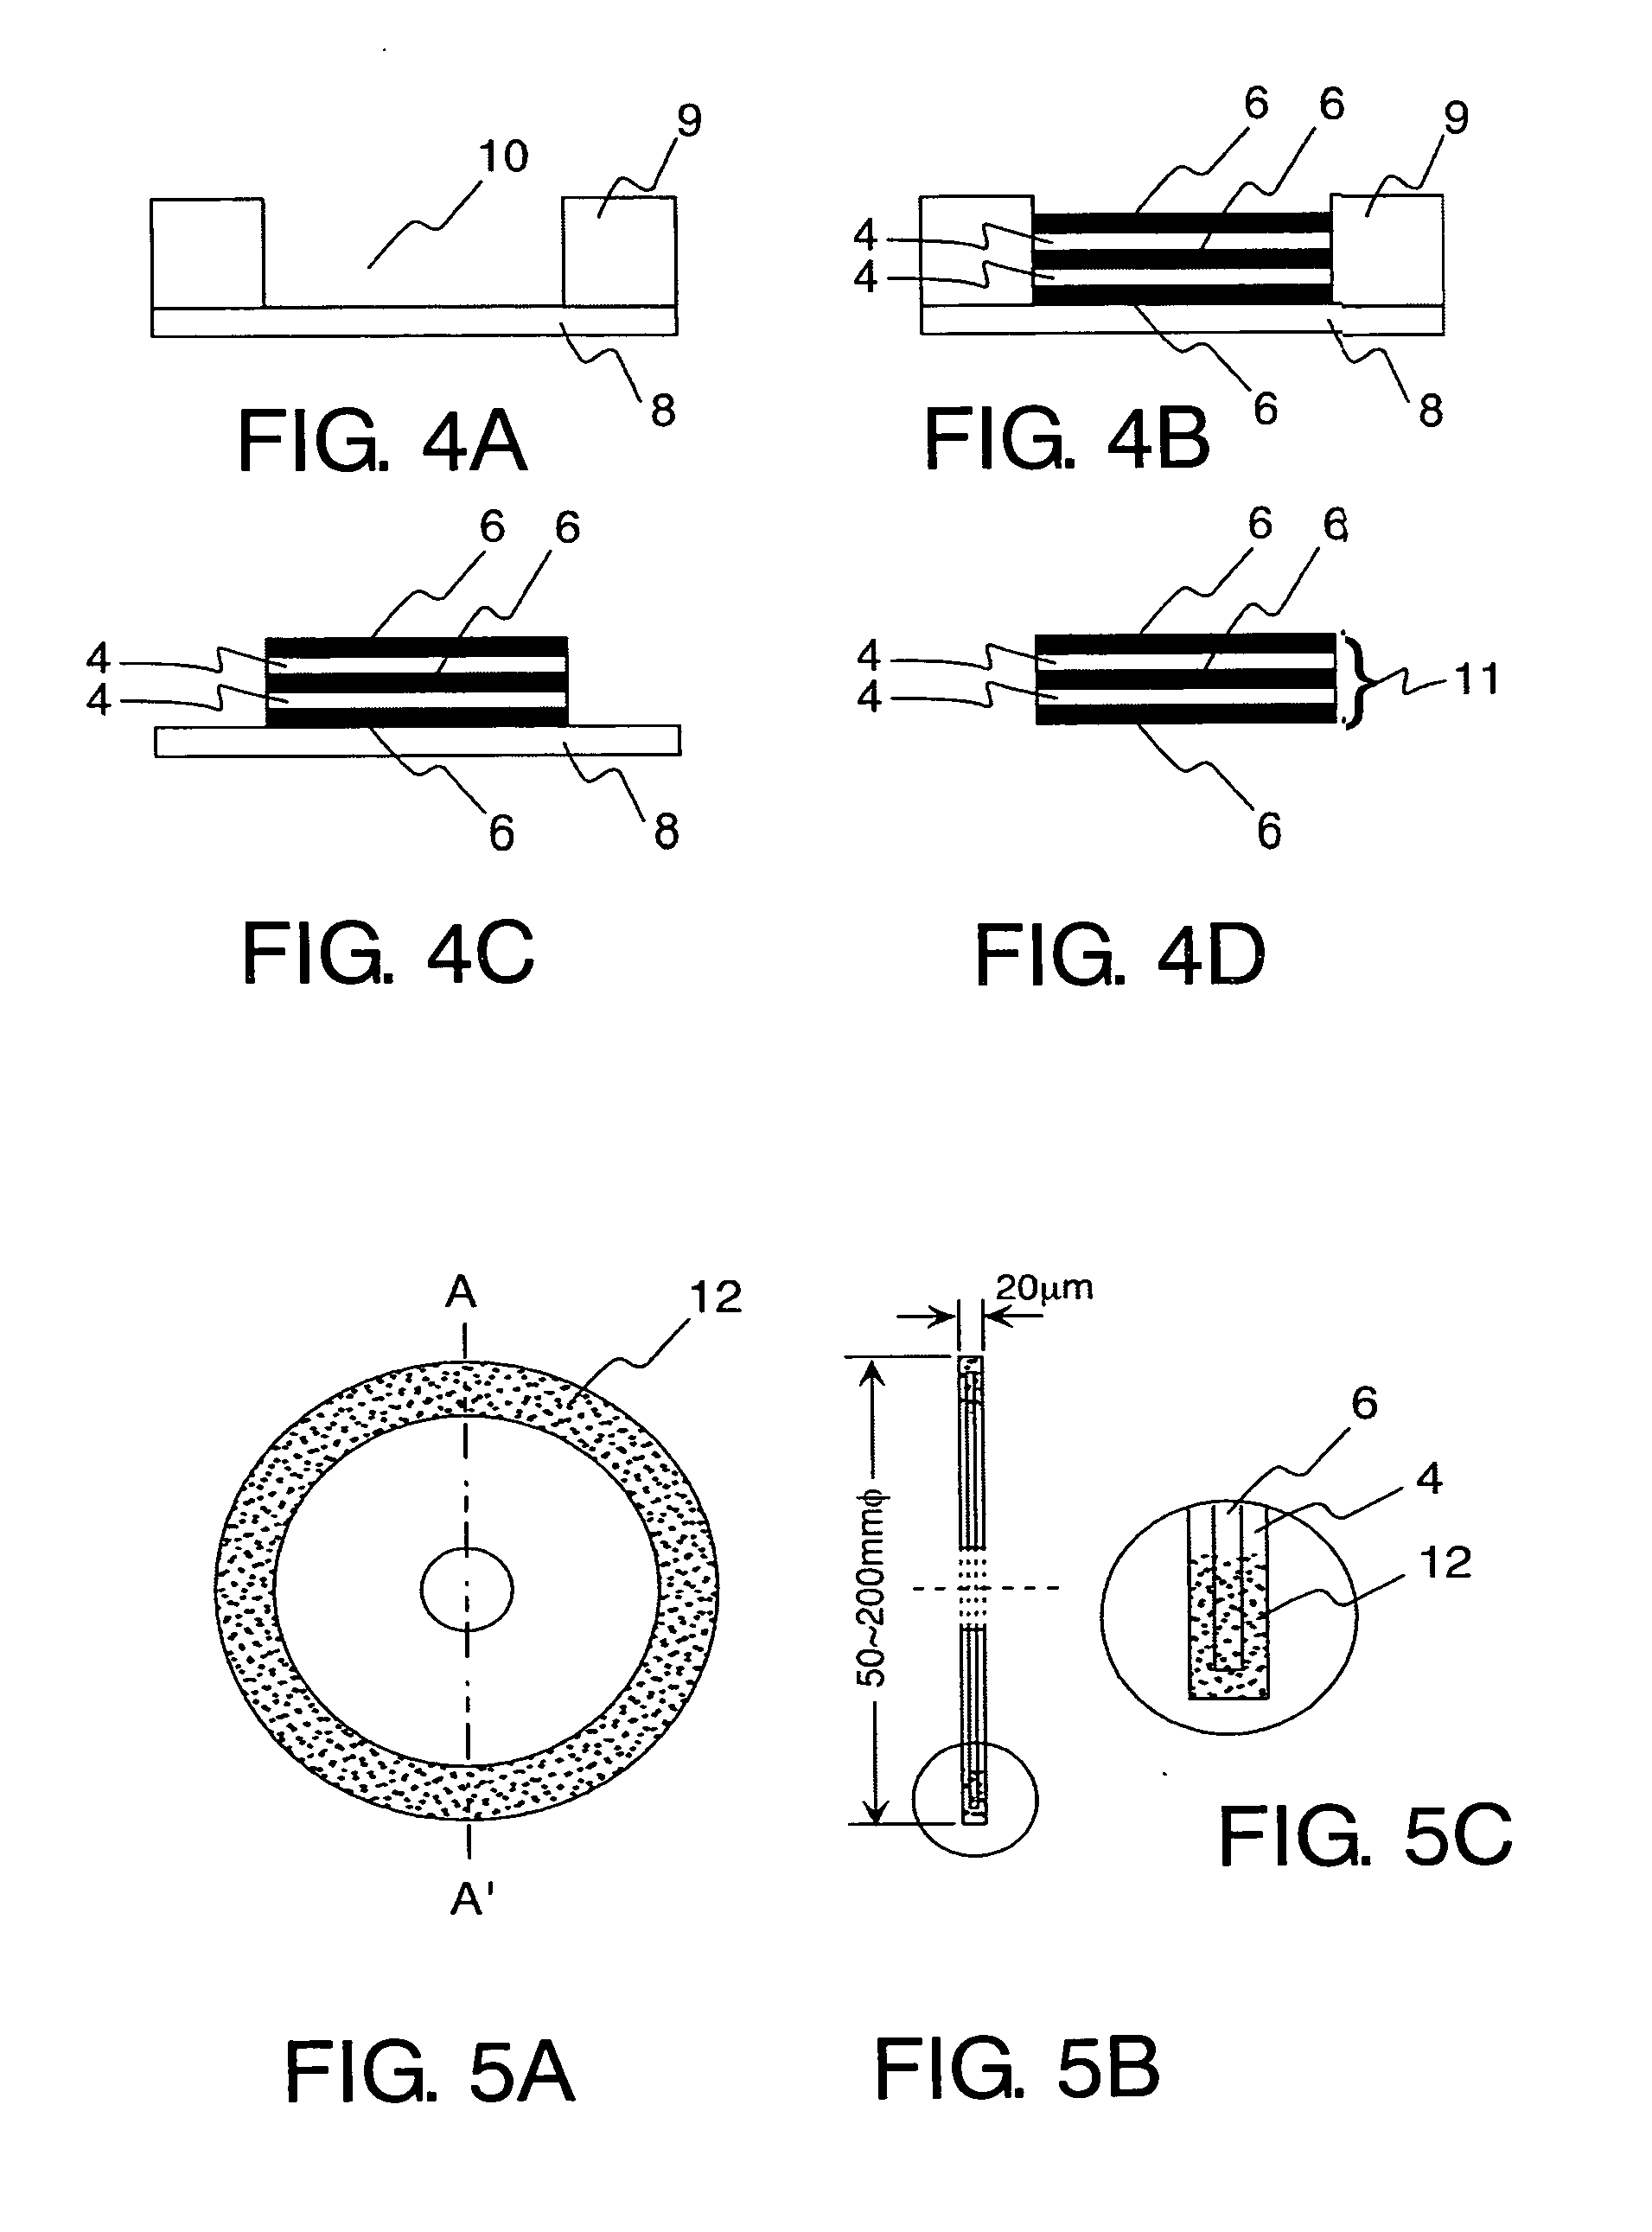 Laminated metal thin plate formed by electrodeposition and method of producing the same